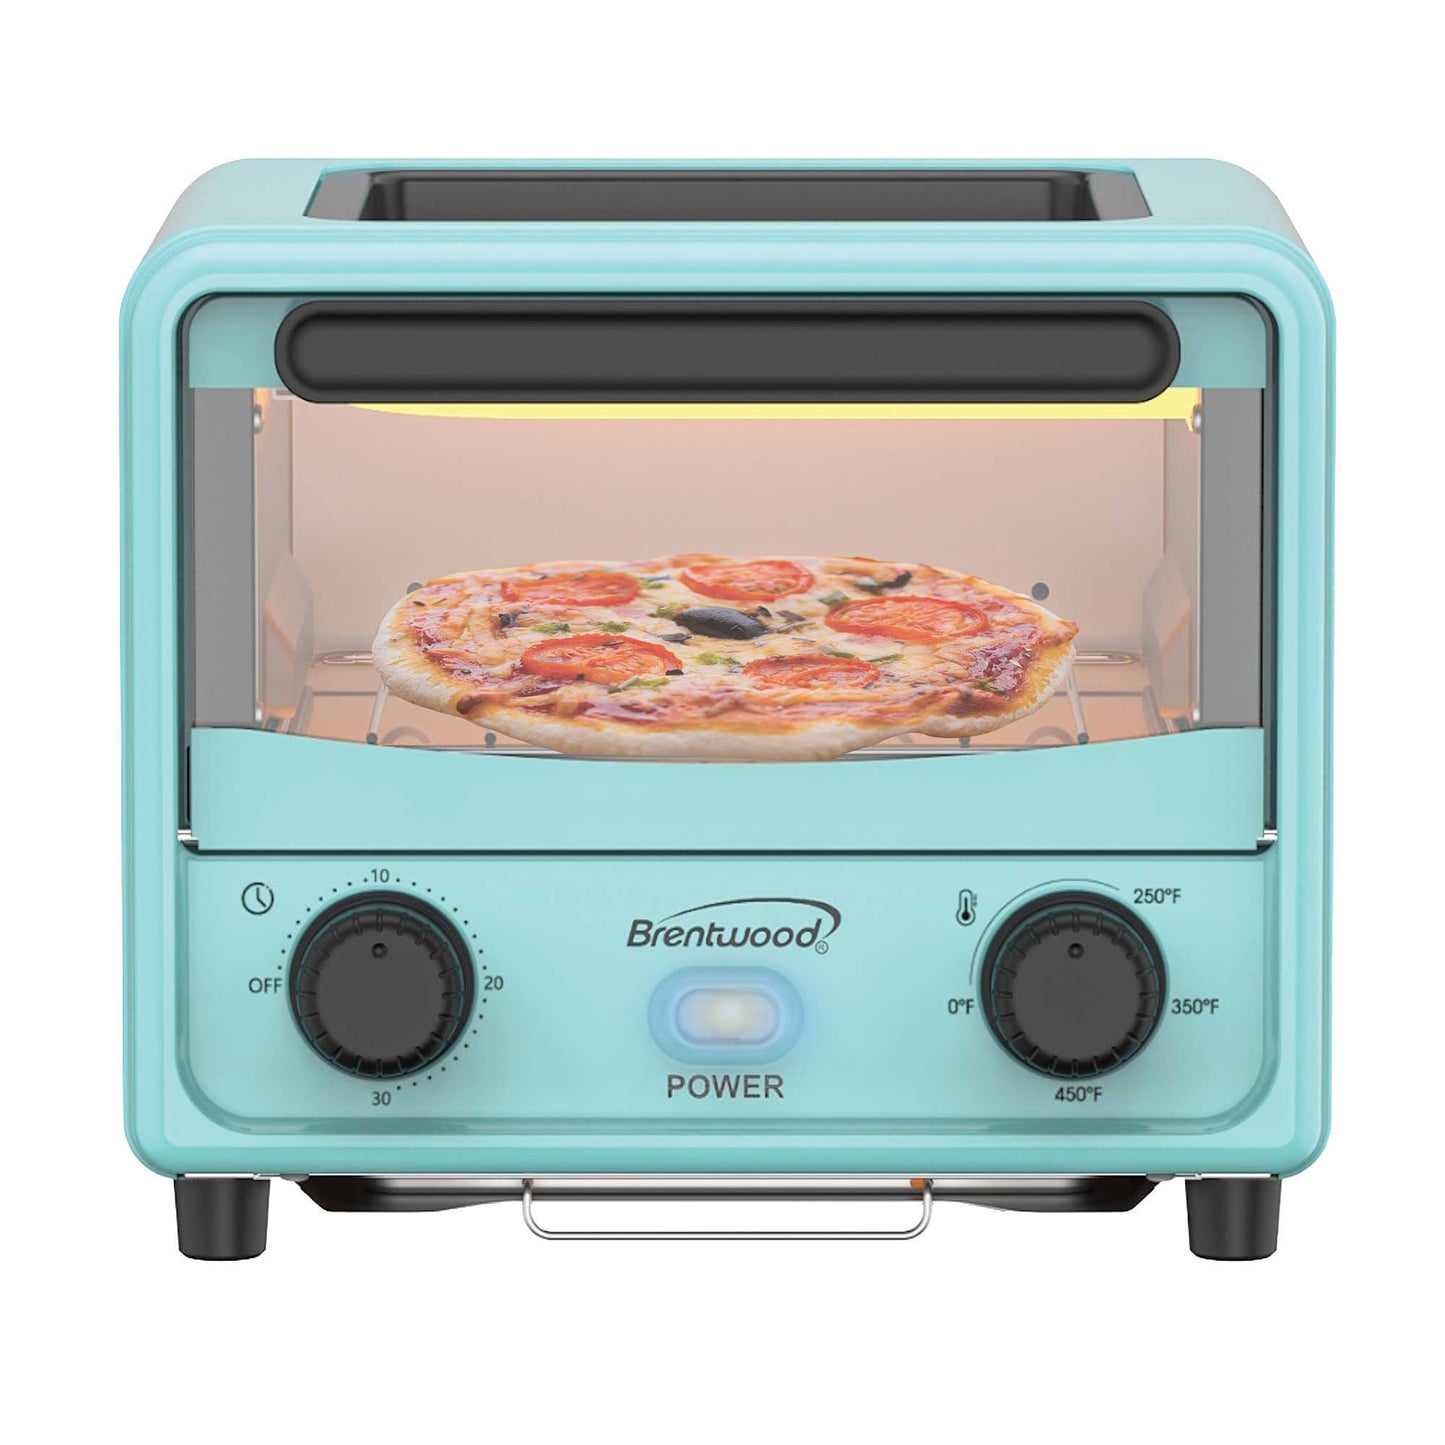 Brentwood 2 in 1 Mini Toaster Oven - Blue